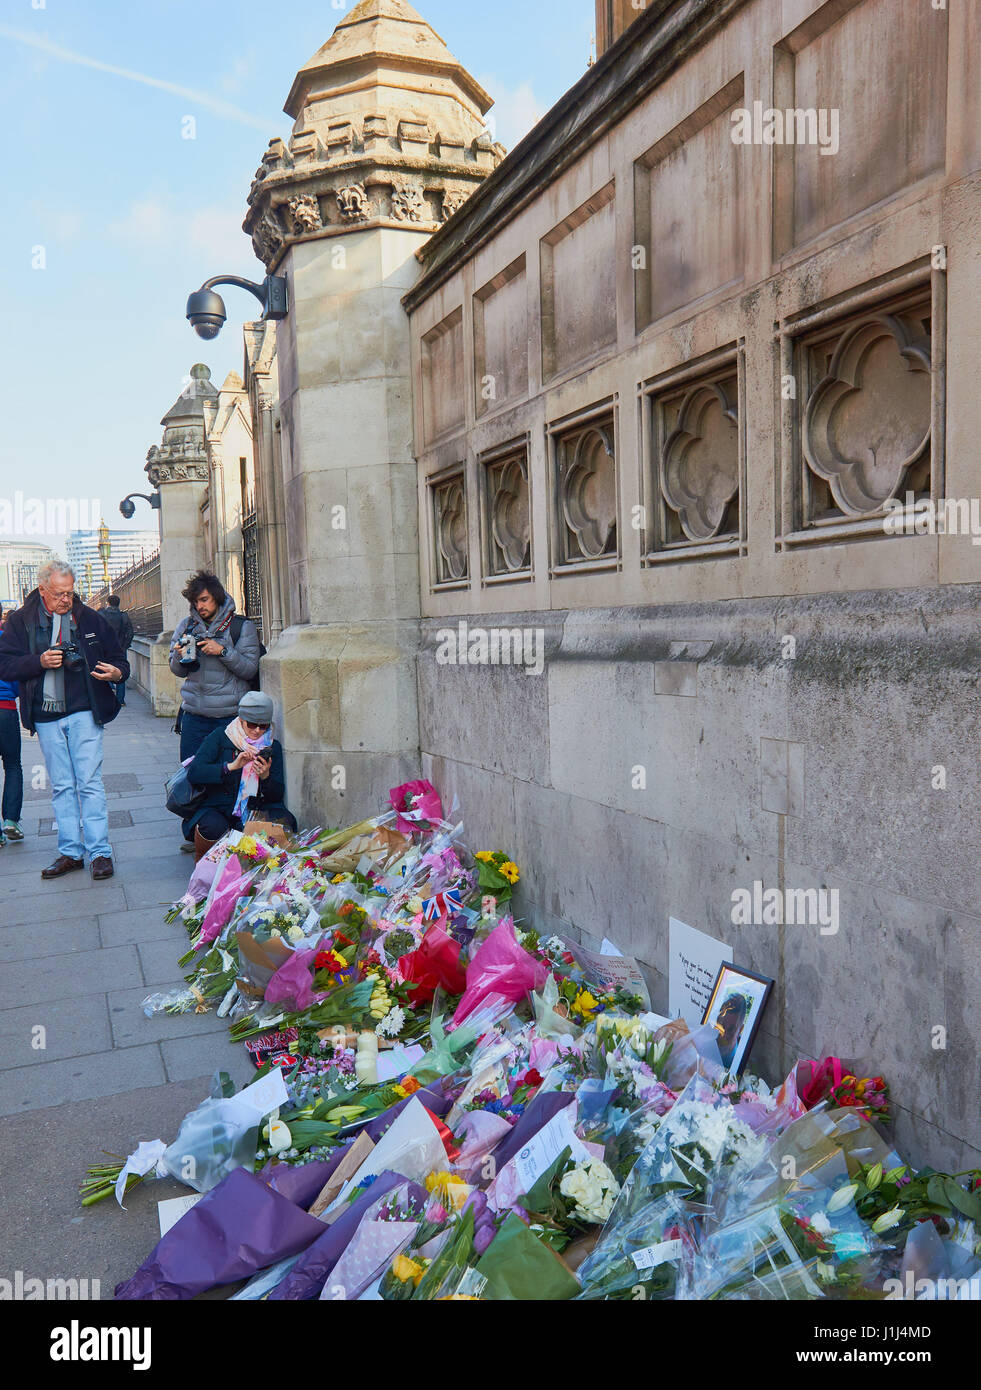 Flowers and tributes to victims of the Westminster terrorist attack, London, England Stock Photo